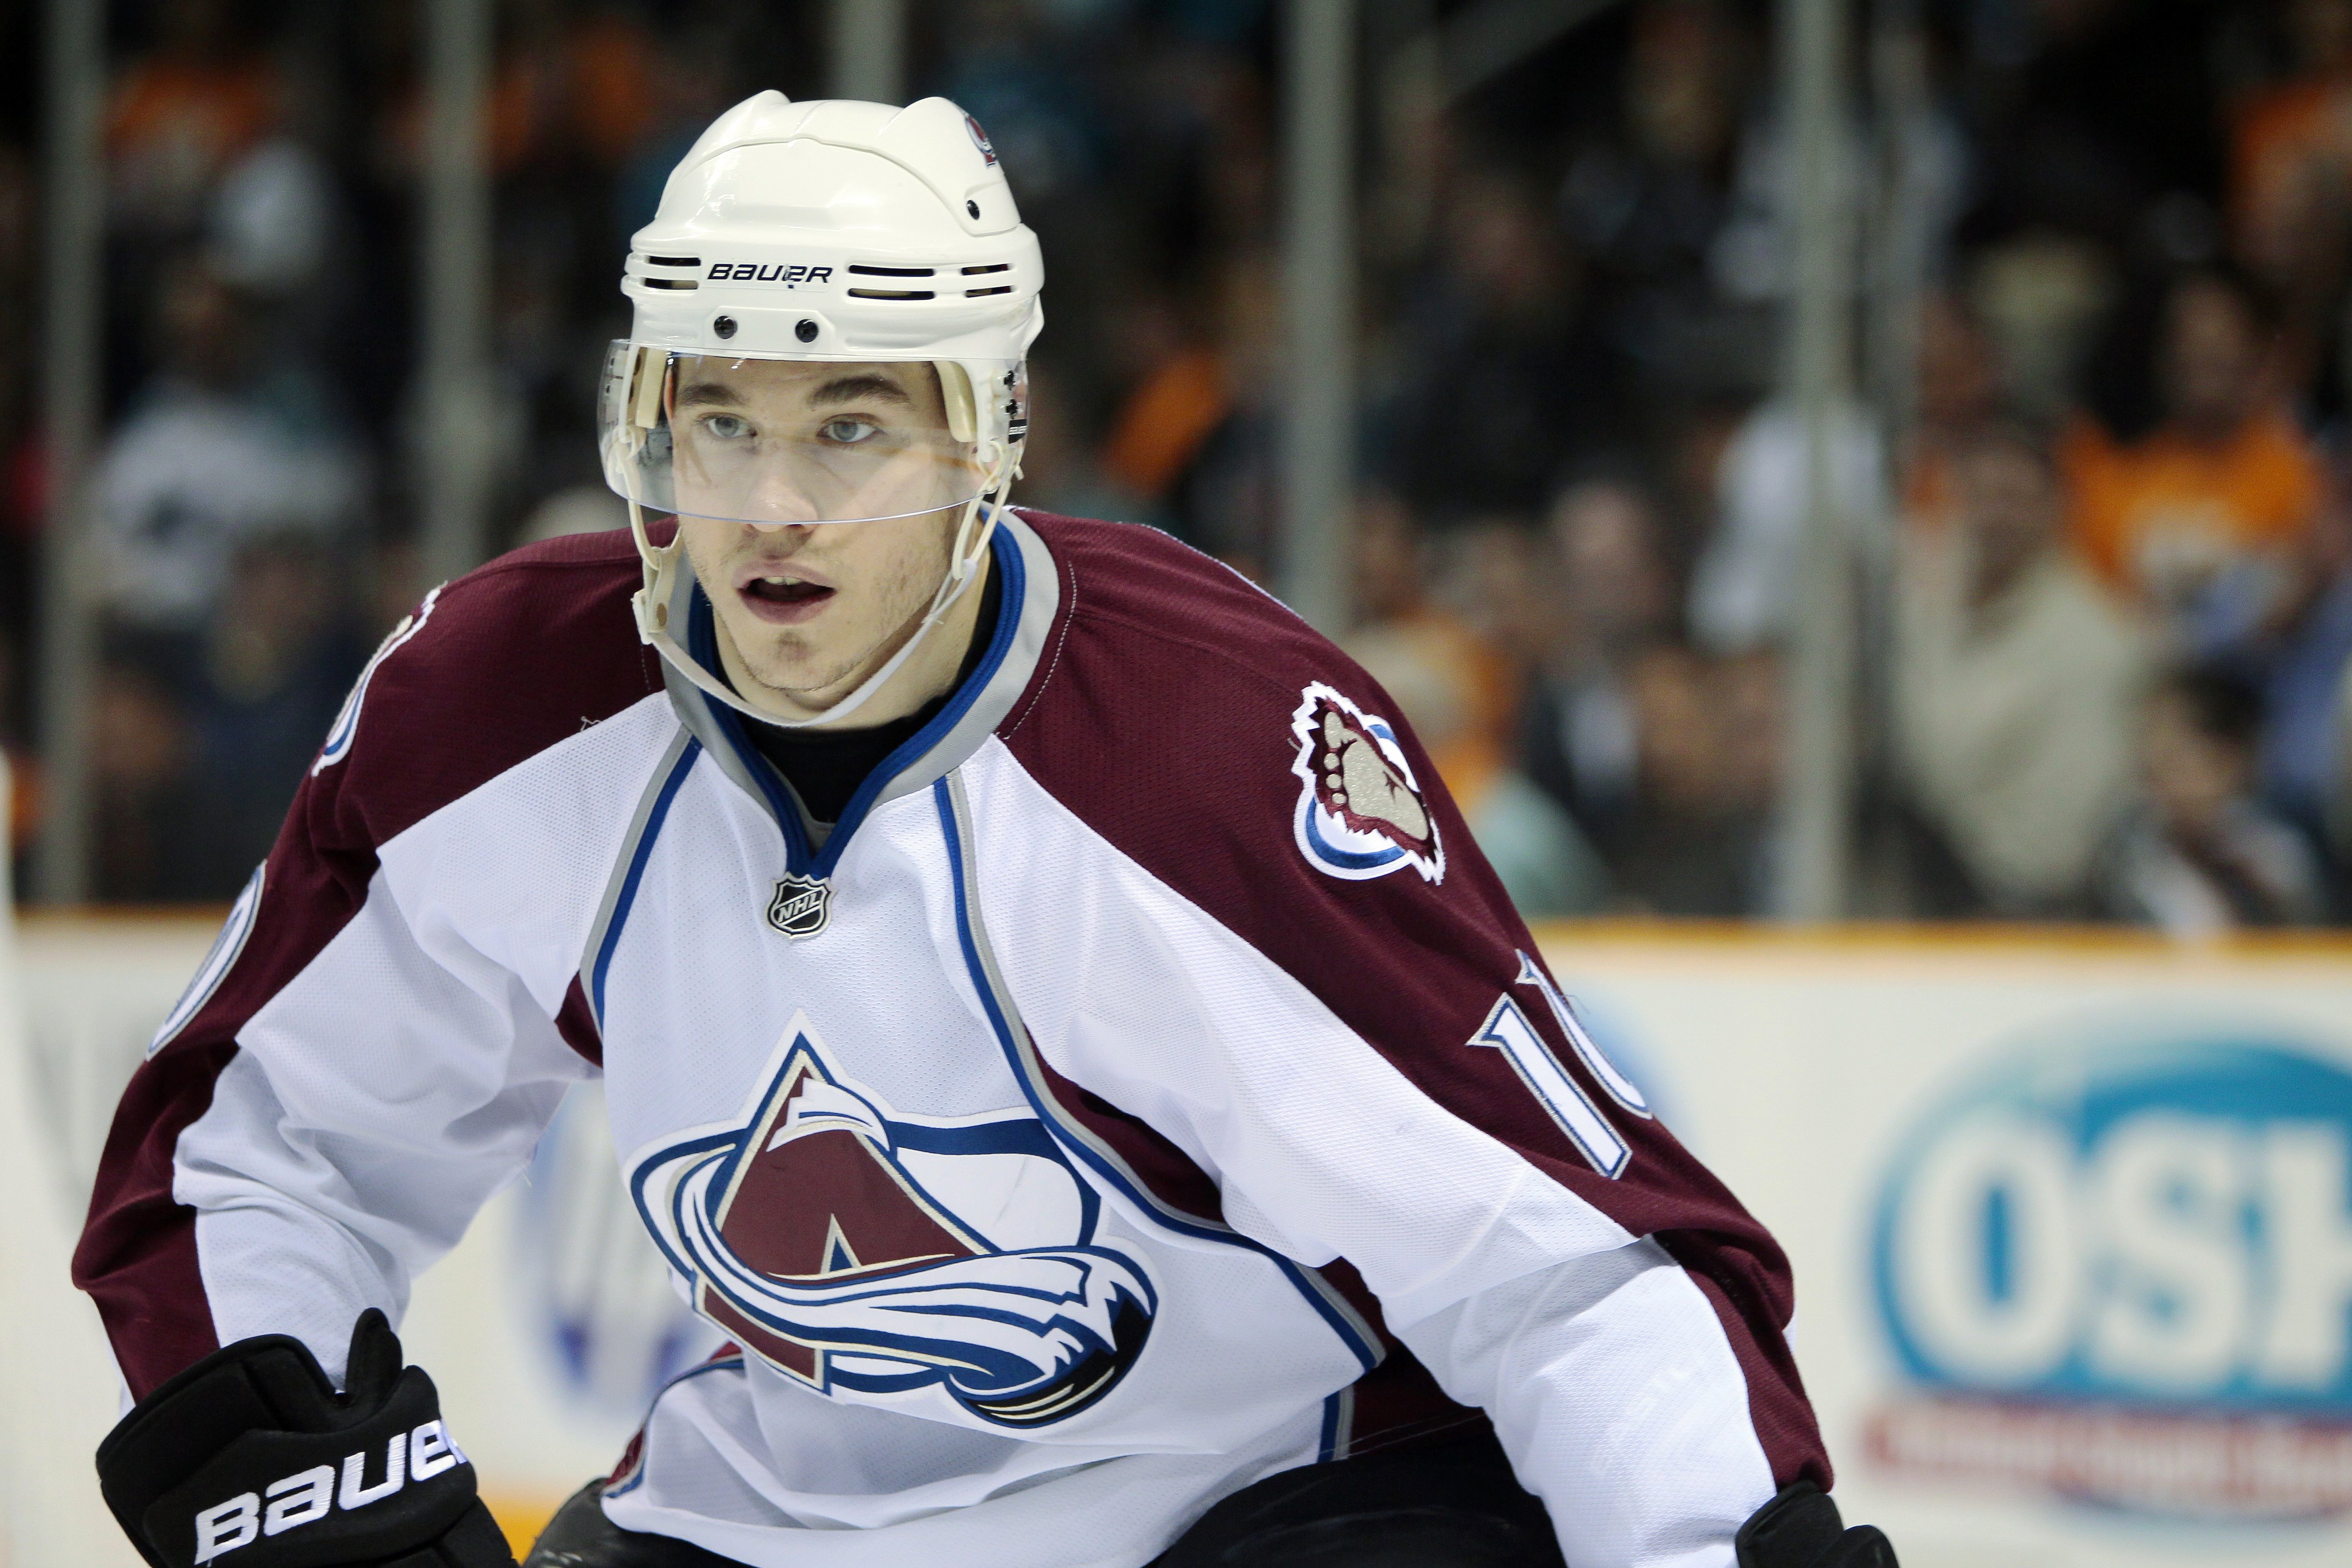 Individual keys to success for the Colorado Avalanche roster